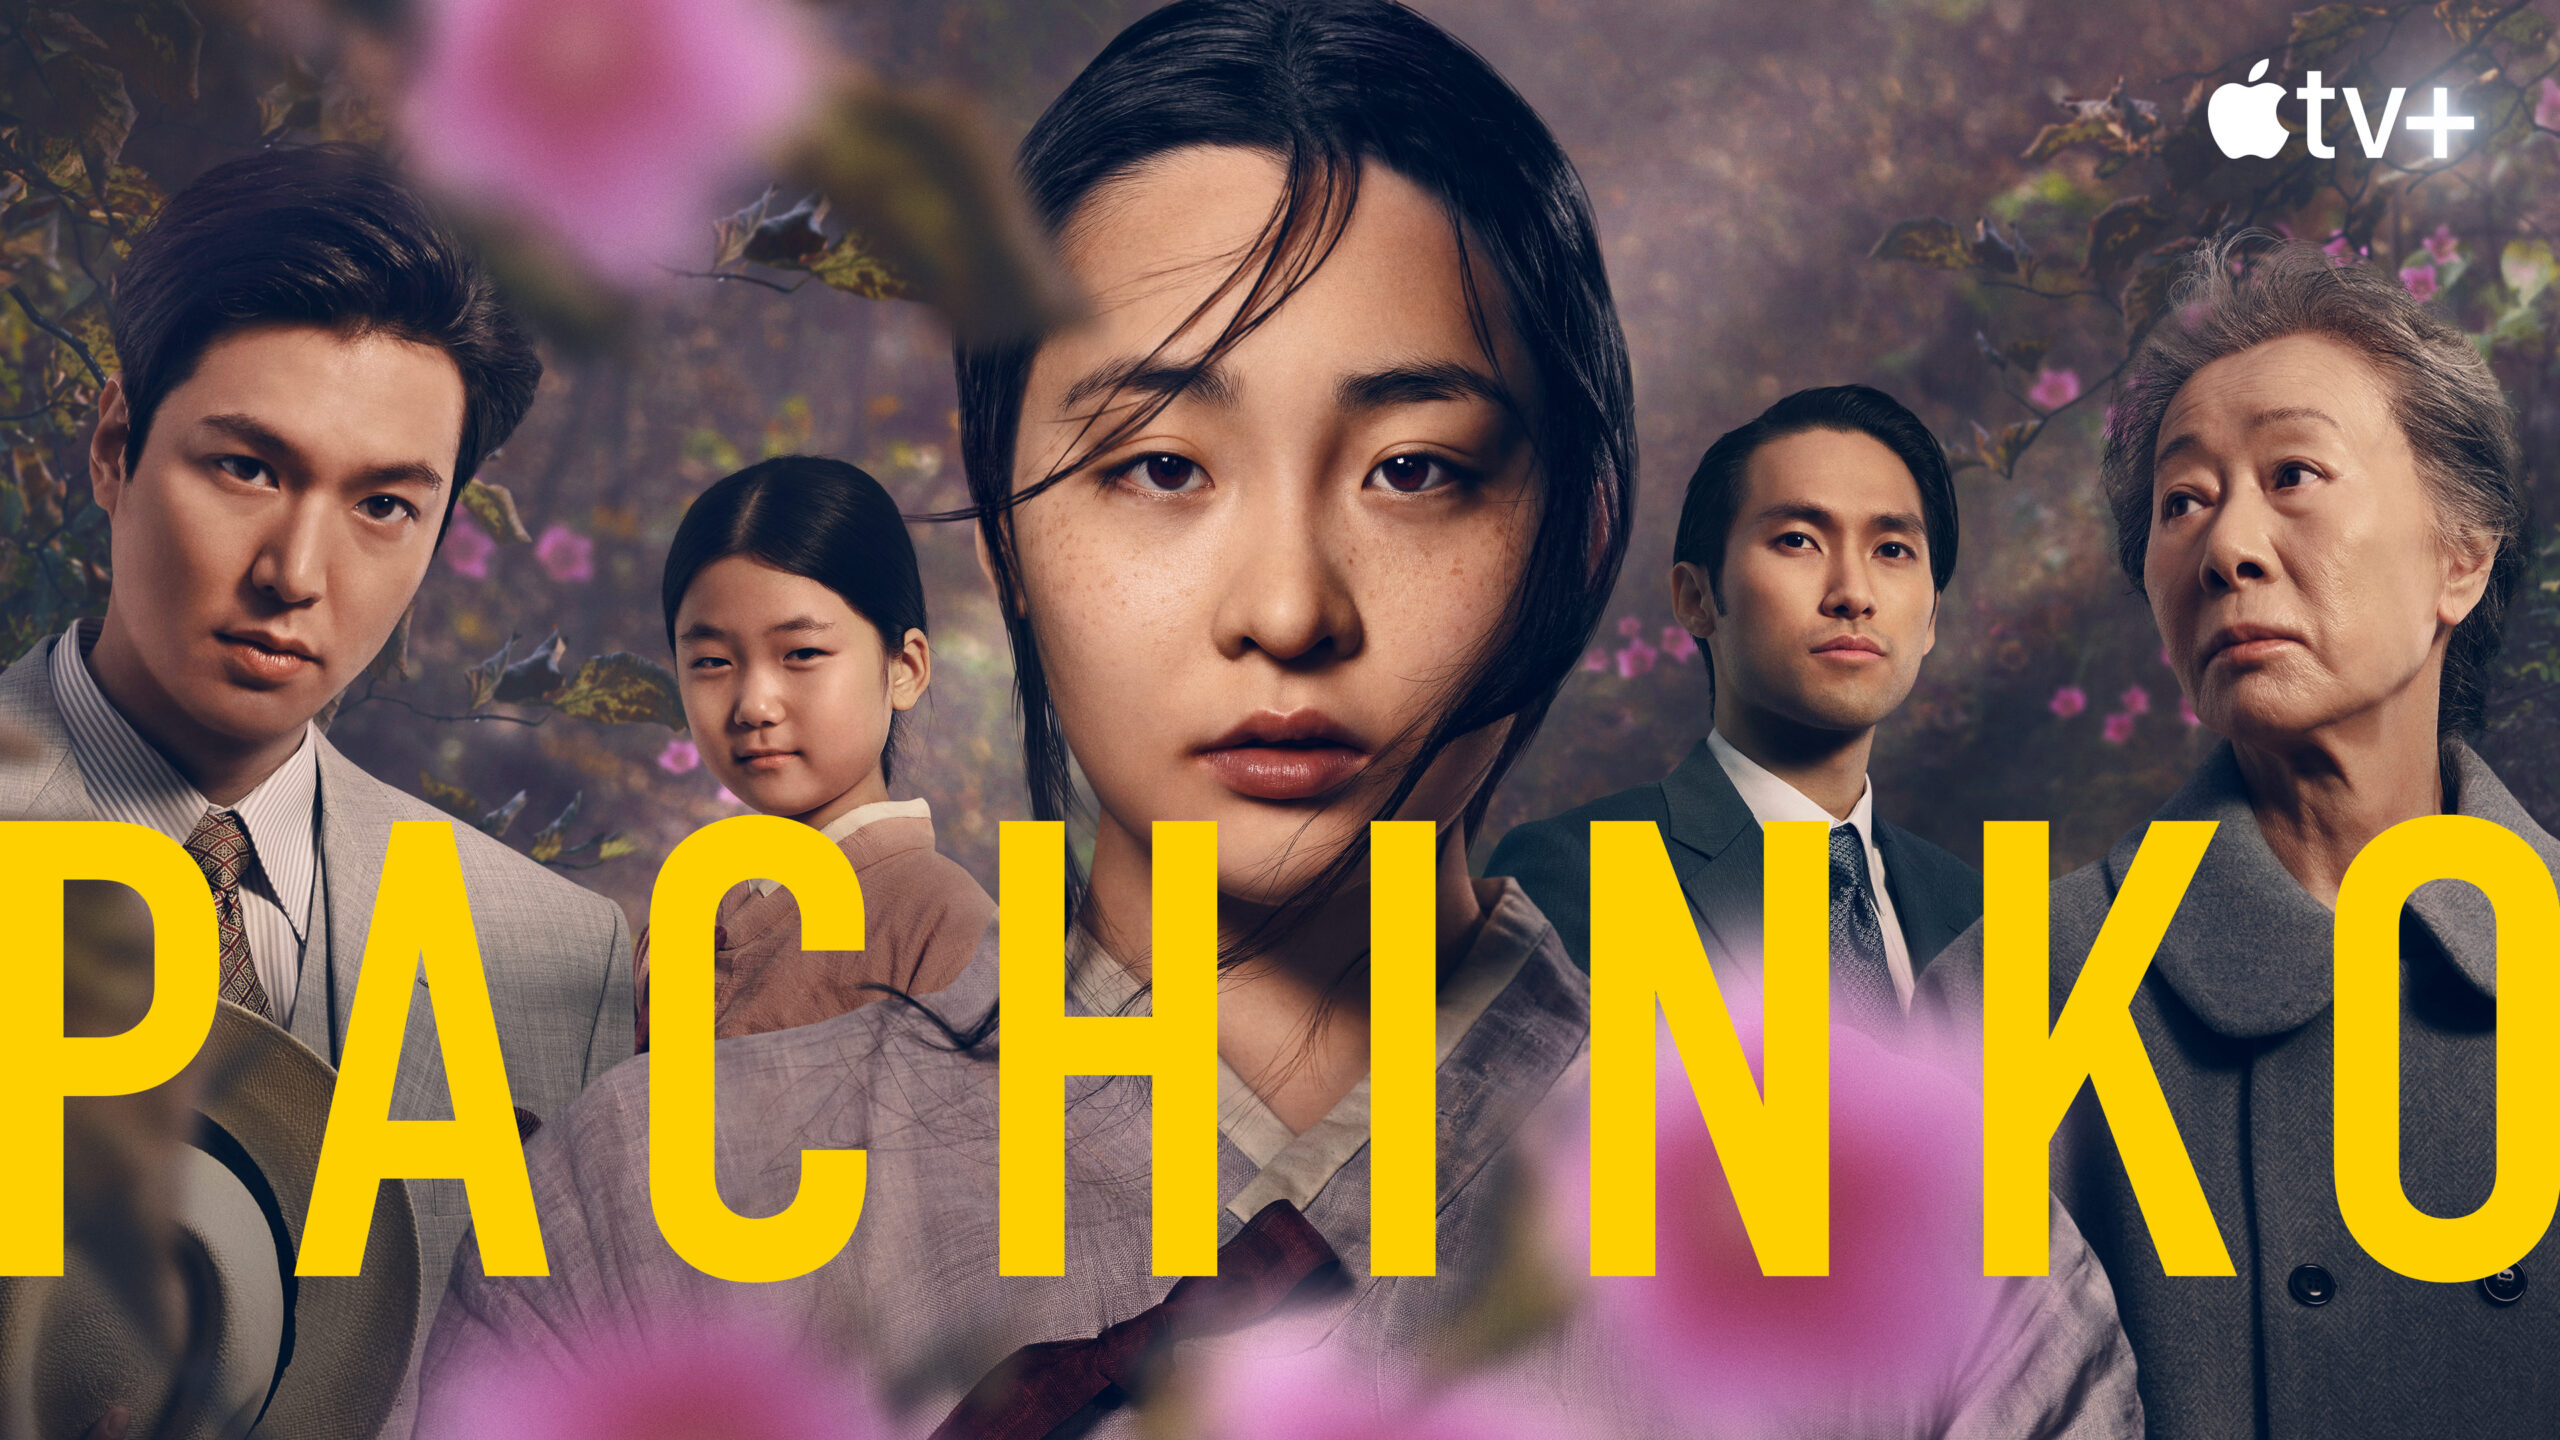 Apple TV+ Orders A Second Season For “Pachinko”